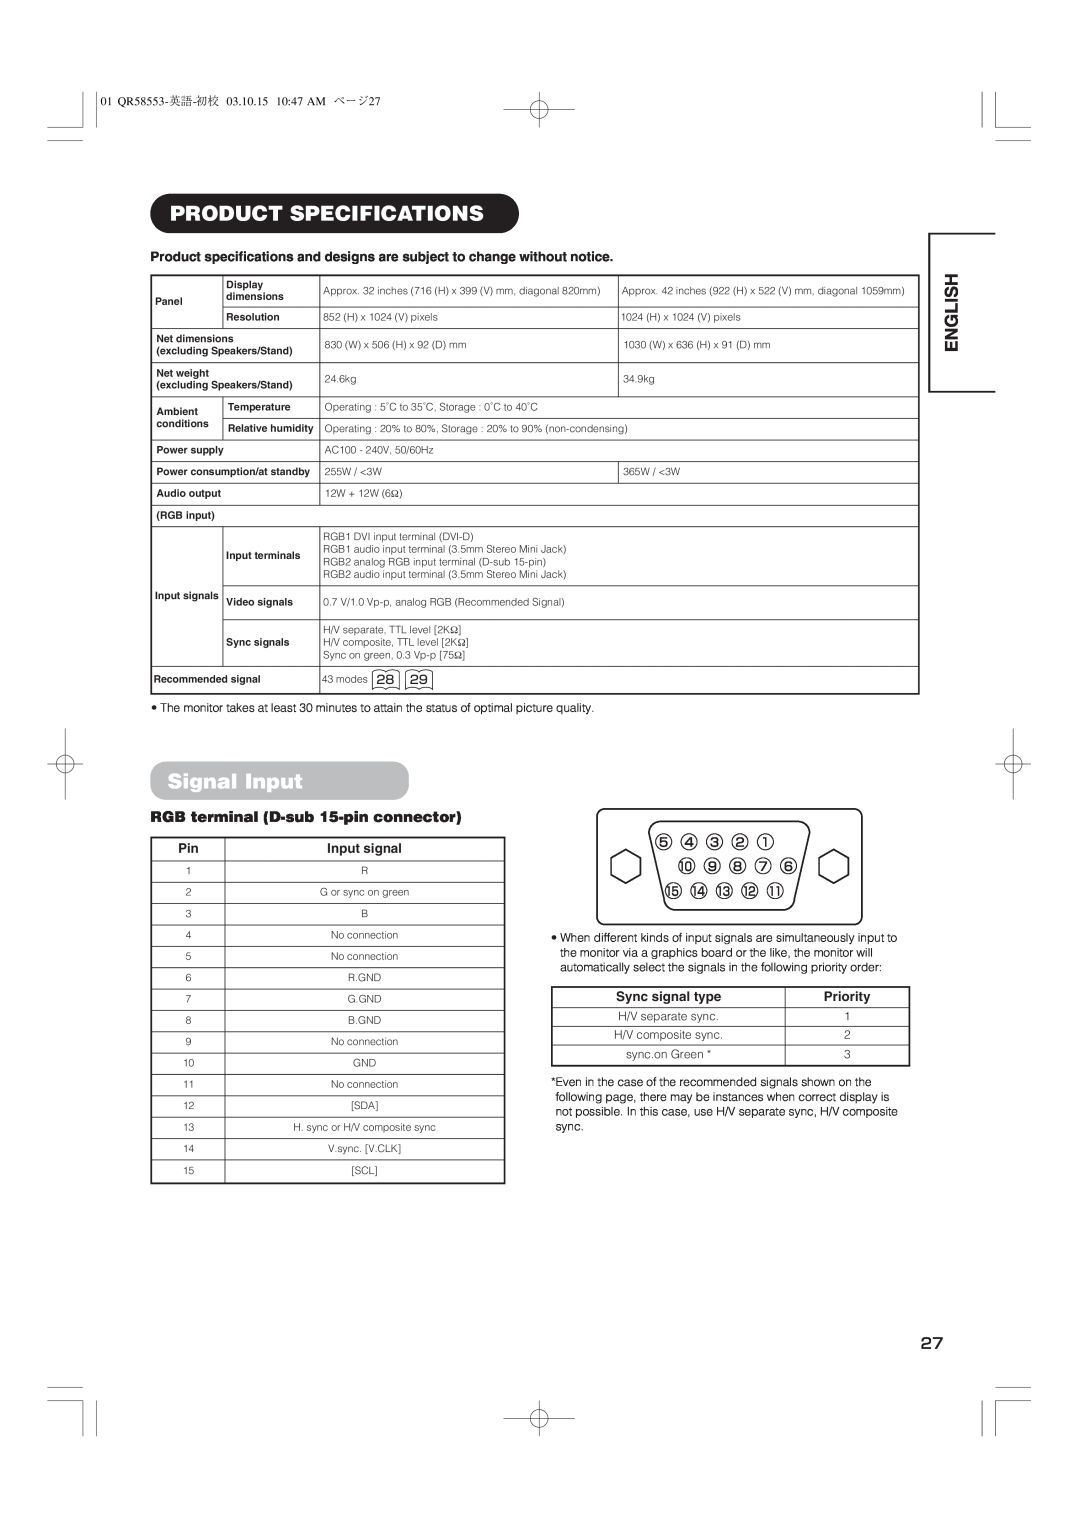 Hitachi 42PD5000 user manual Product Specifications, Signal Input, English, RGB terminal D-sub 15-pin connector 